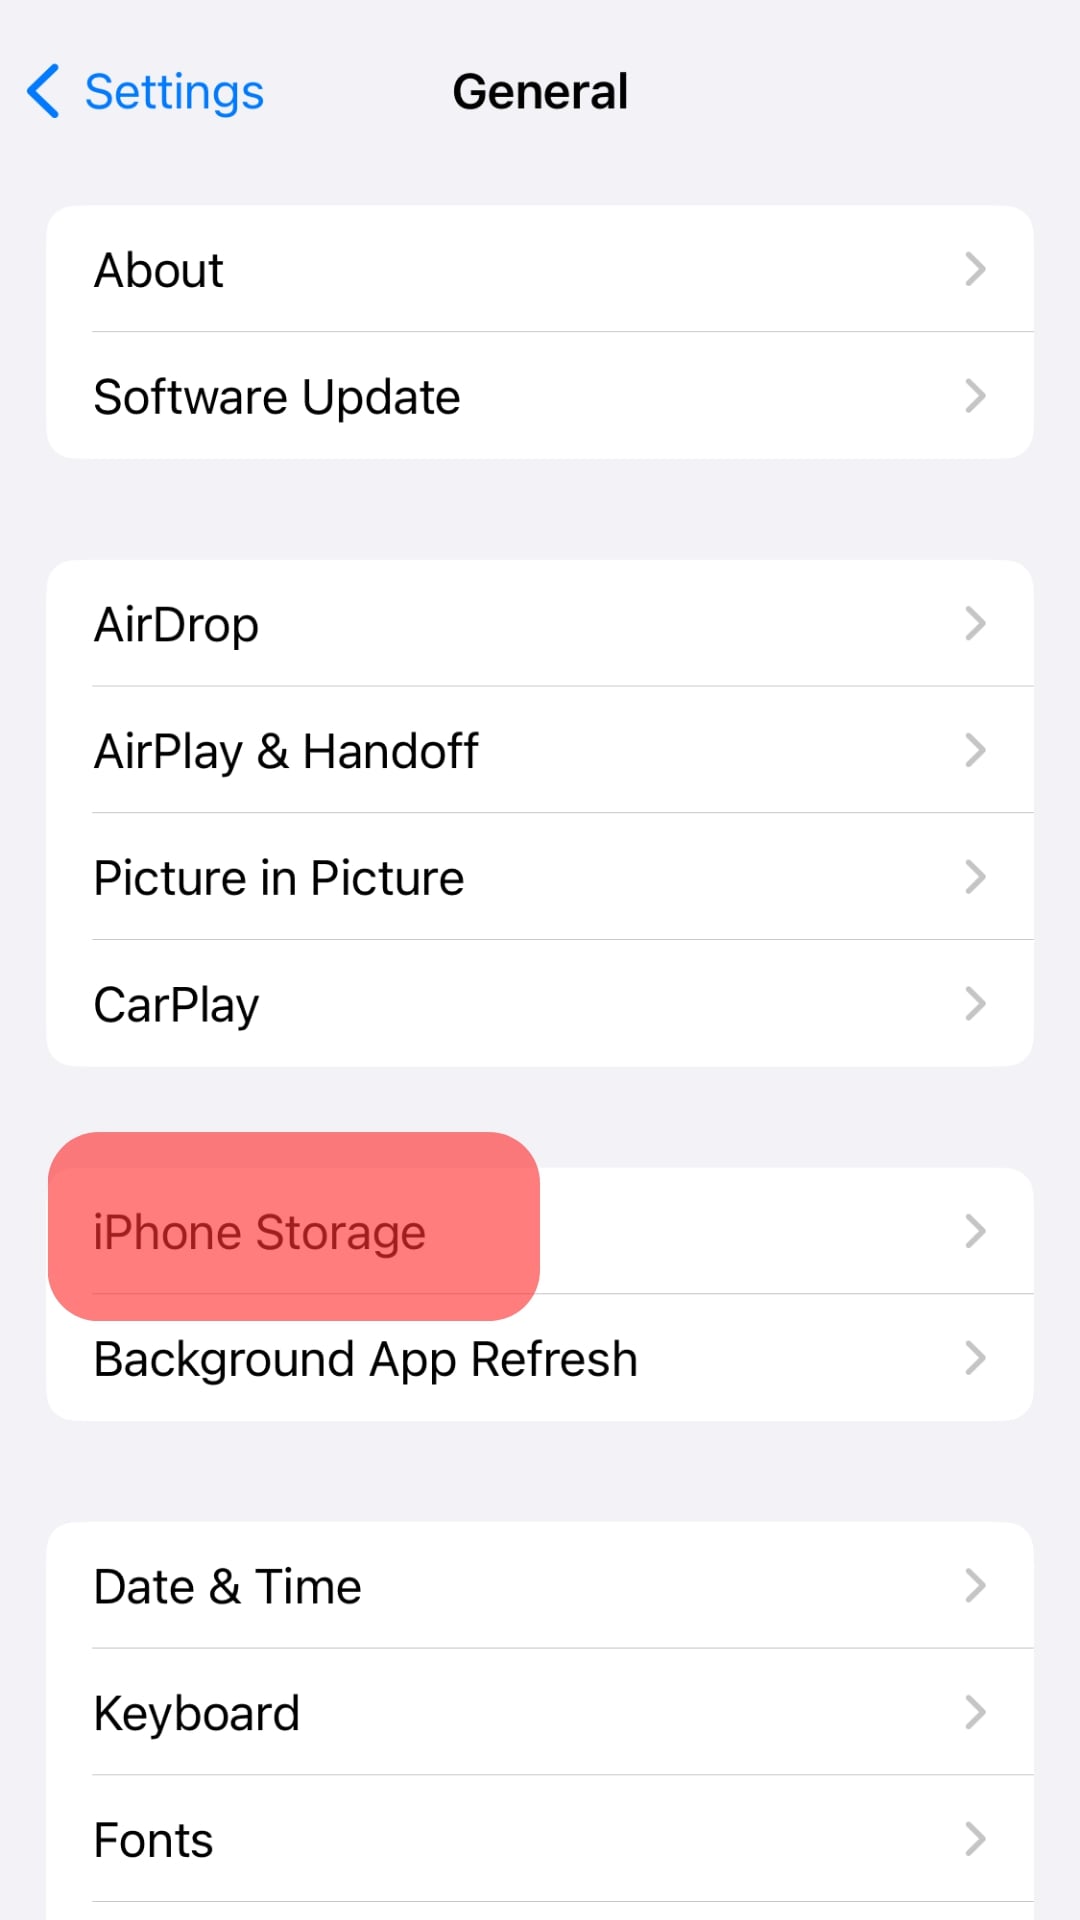 Tap On The Iphone Storage Option.